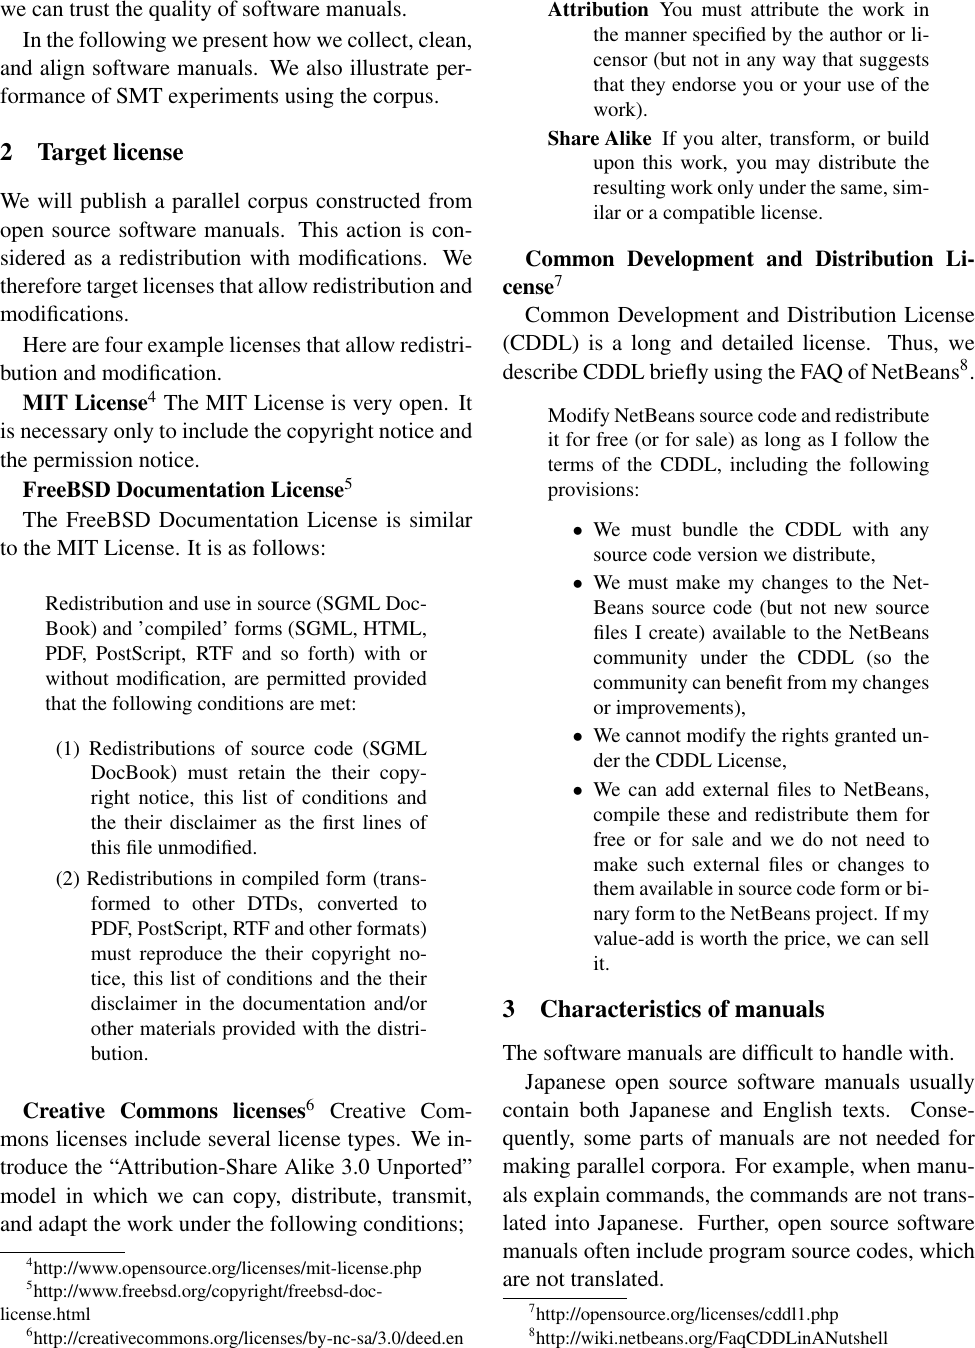 Page 2 of 6 - Development Of A Japanese-English Software Manual Parallel Corpus